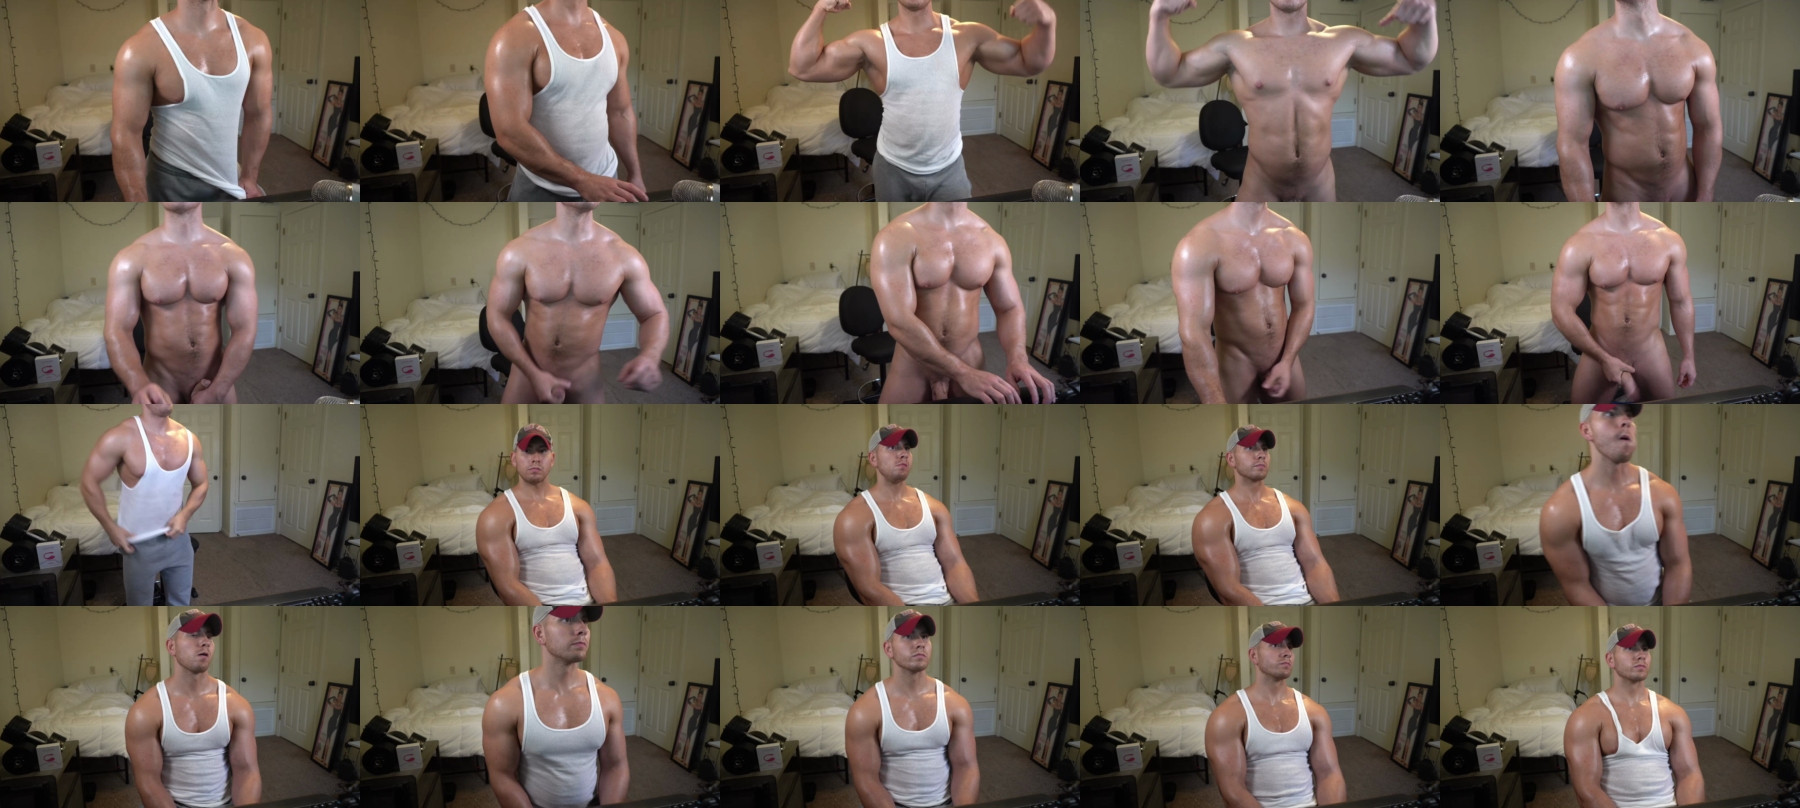 Hotmuscles6t9 Video CAM SHOW @ Chaturbate 21-05-2021